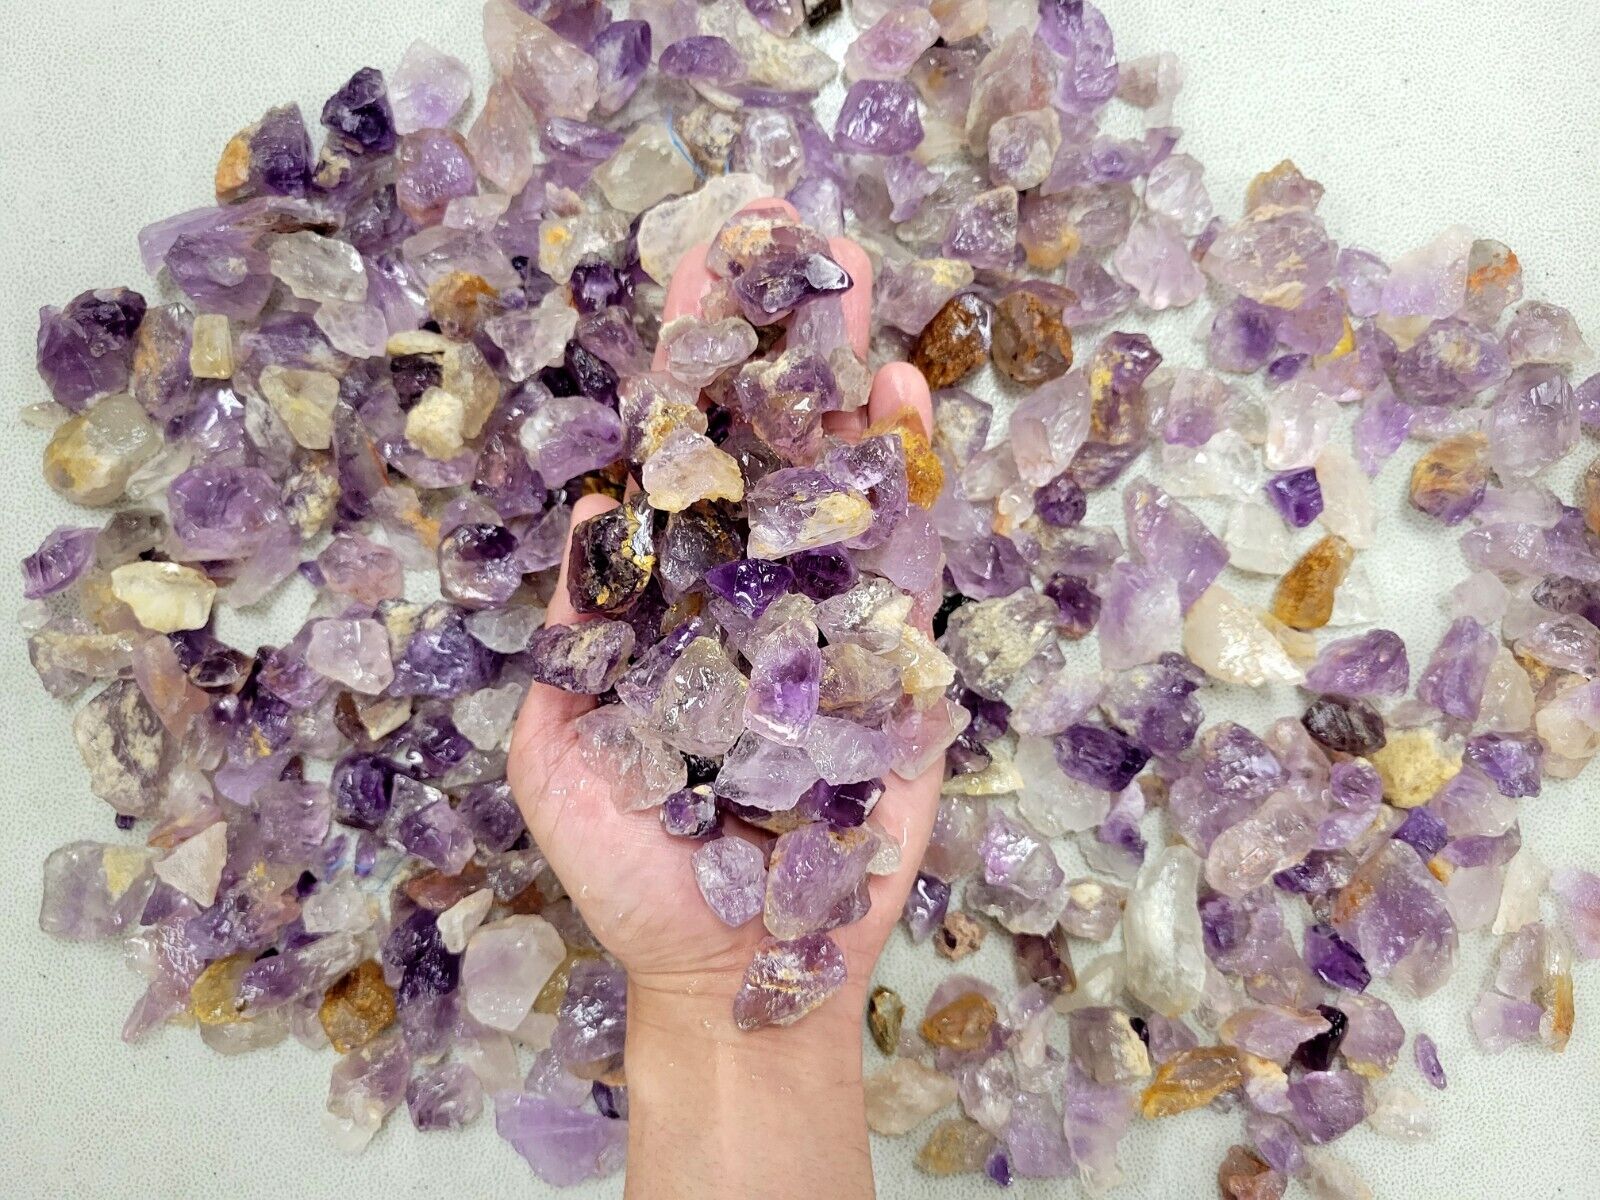 Crushed Amethyst Crystals from Brazil Bulk Raw Rough Chips for Crafting Jewelry